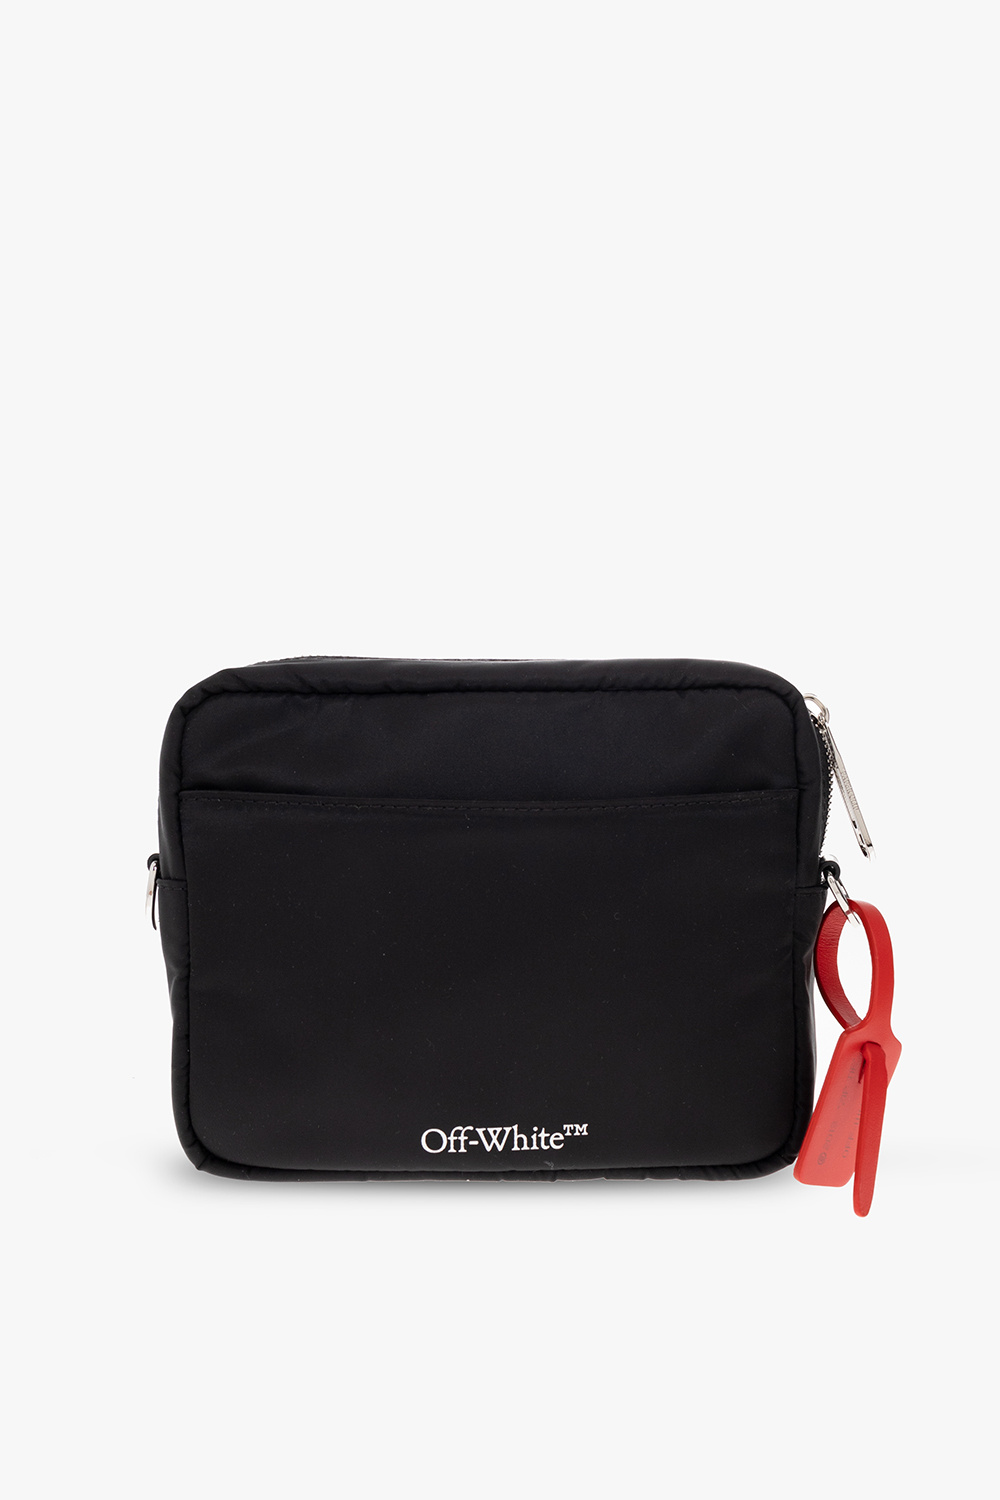 Off-White Shoulder bag with Rainbow cat motif